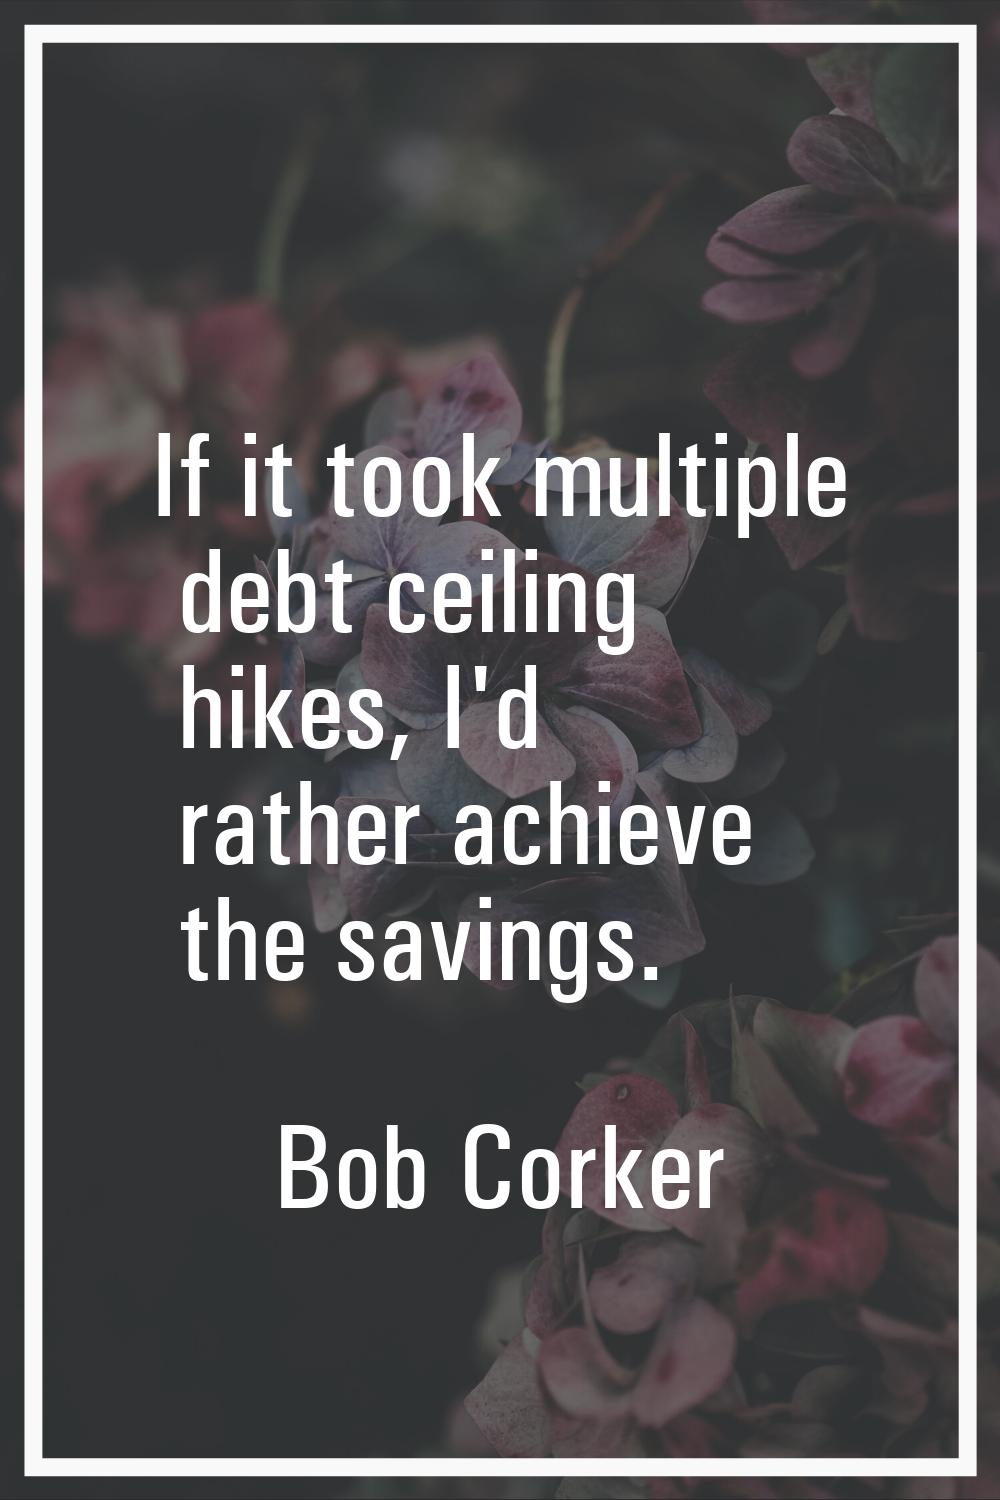 If it took multiple debt ceiling hikes, I'd rather achieve the savings.